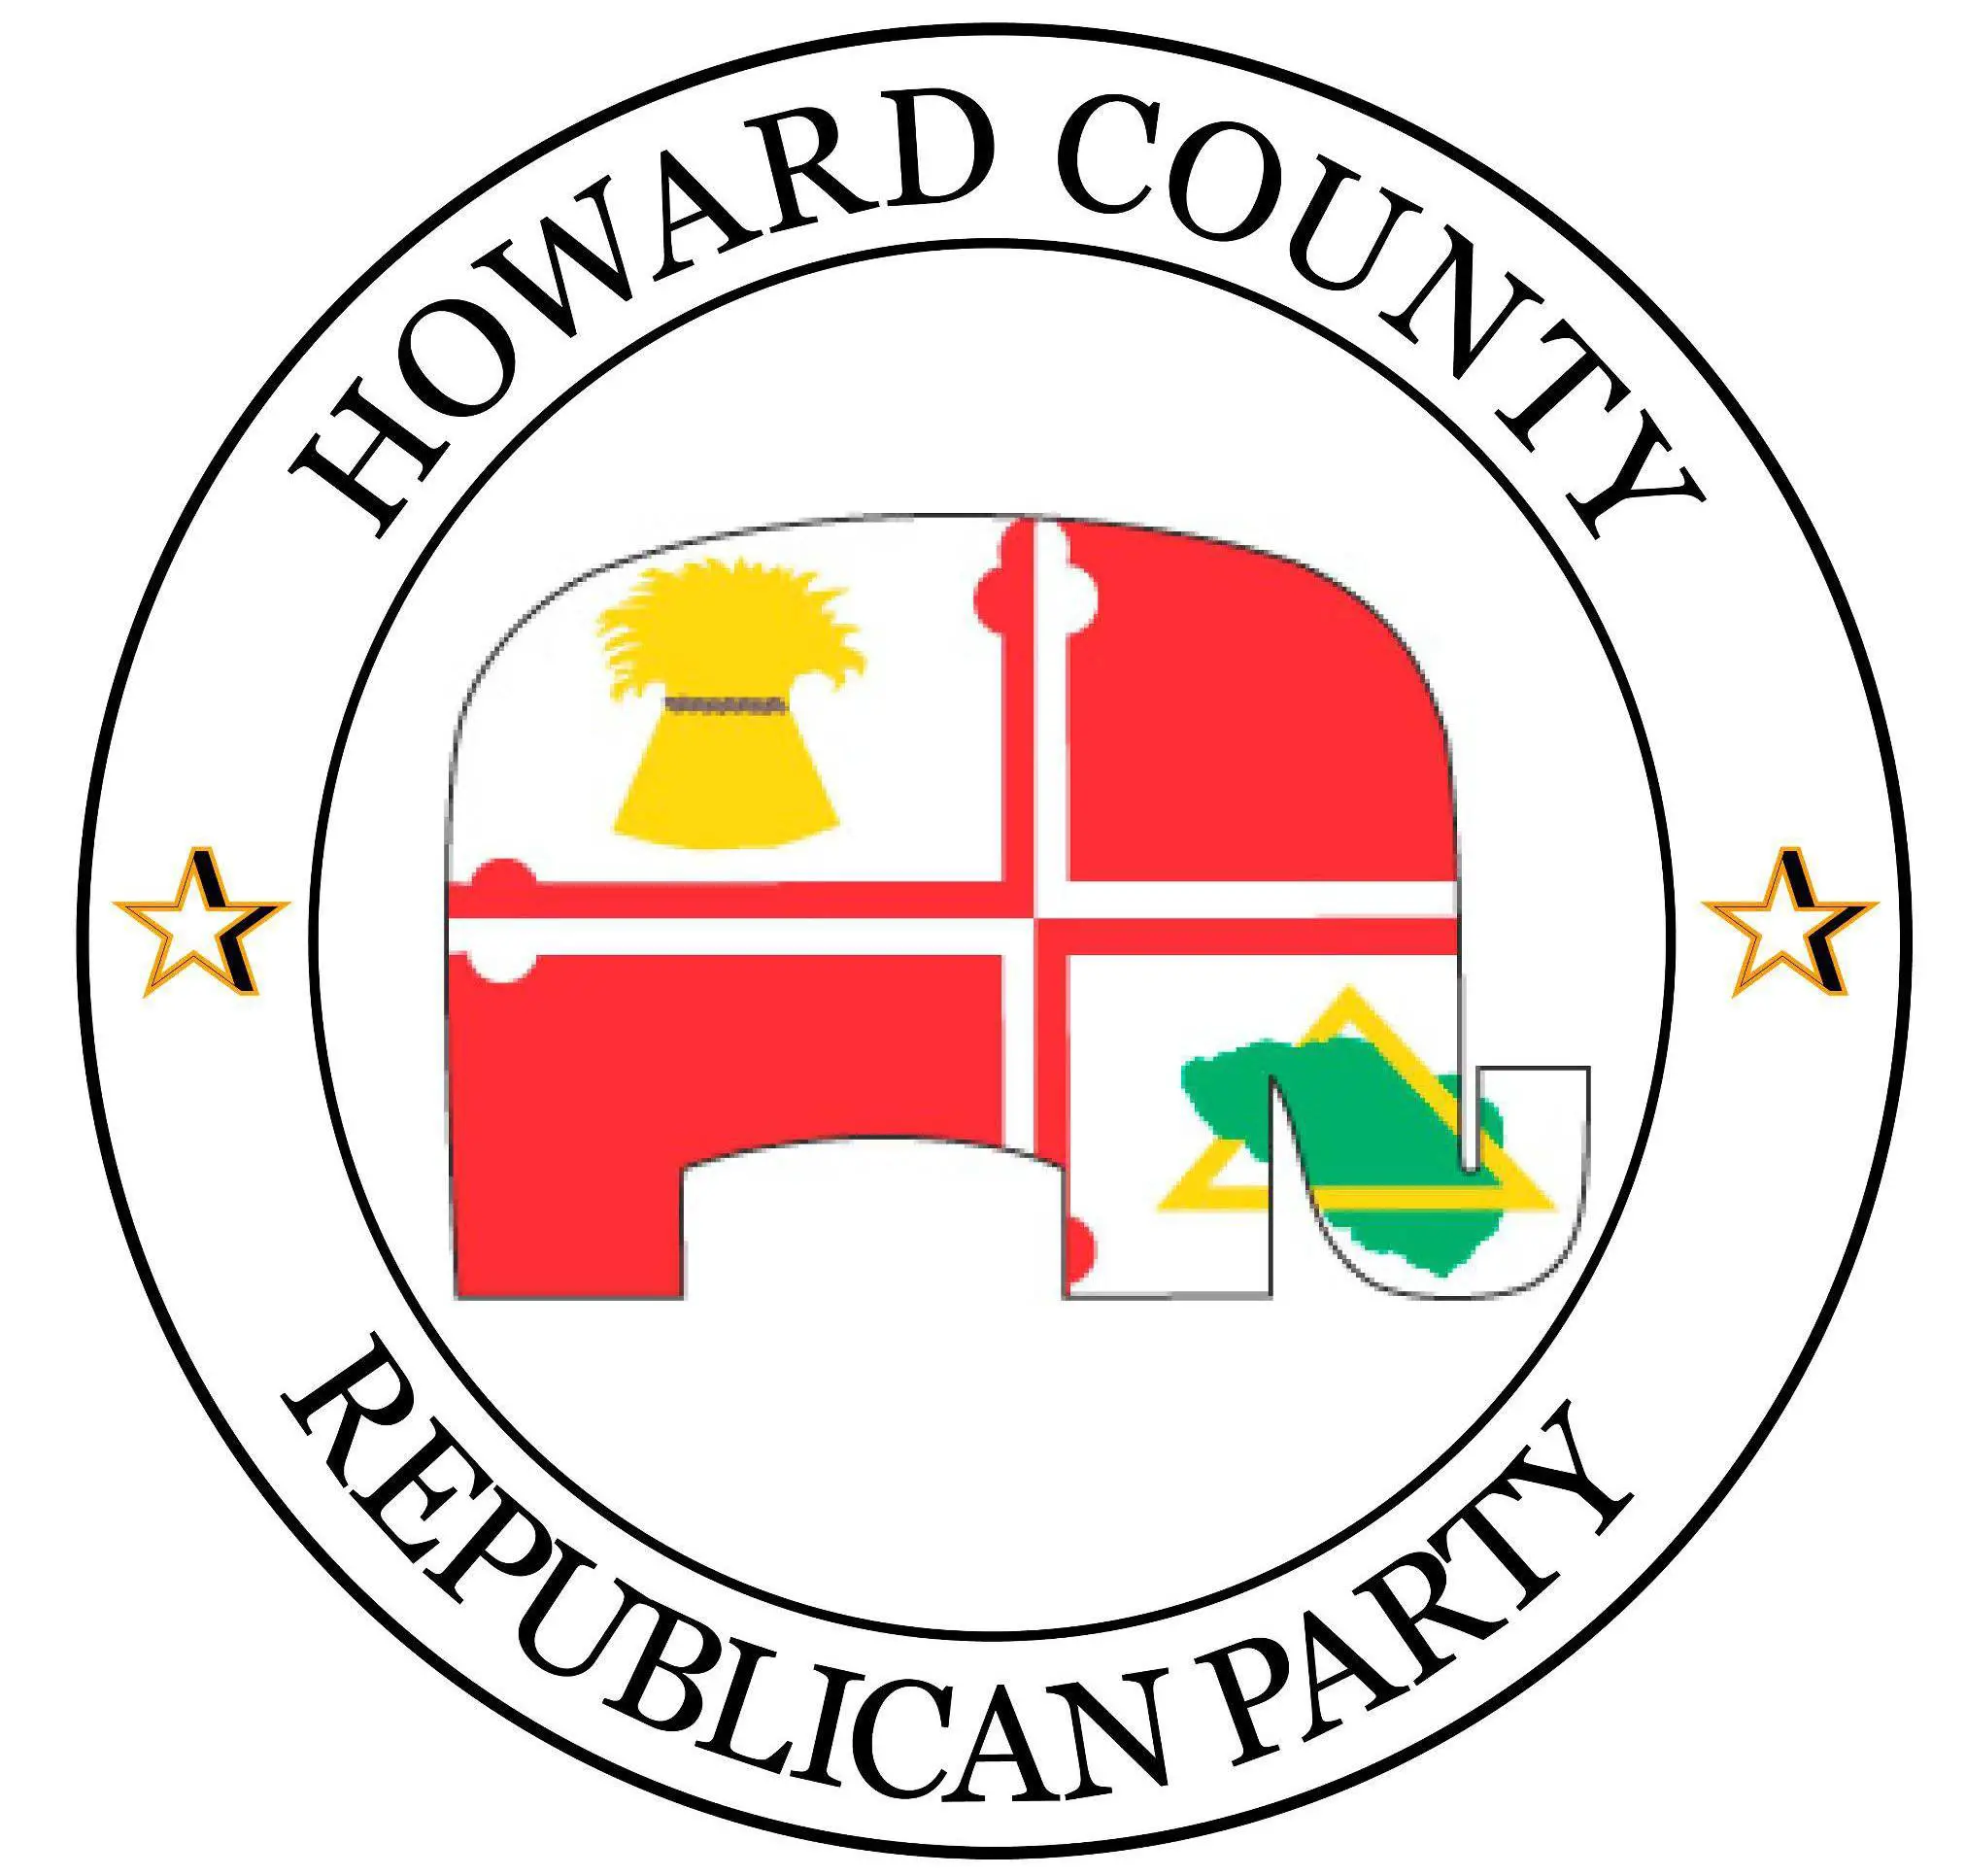 Donate to the Howard County Republican Central Committee